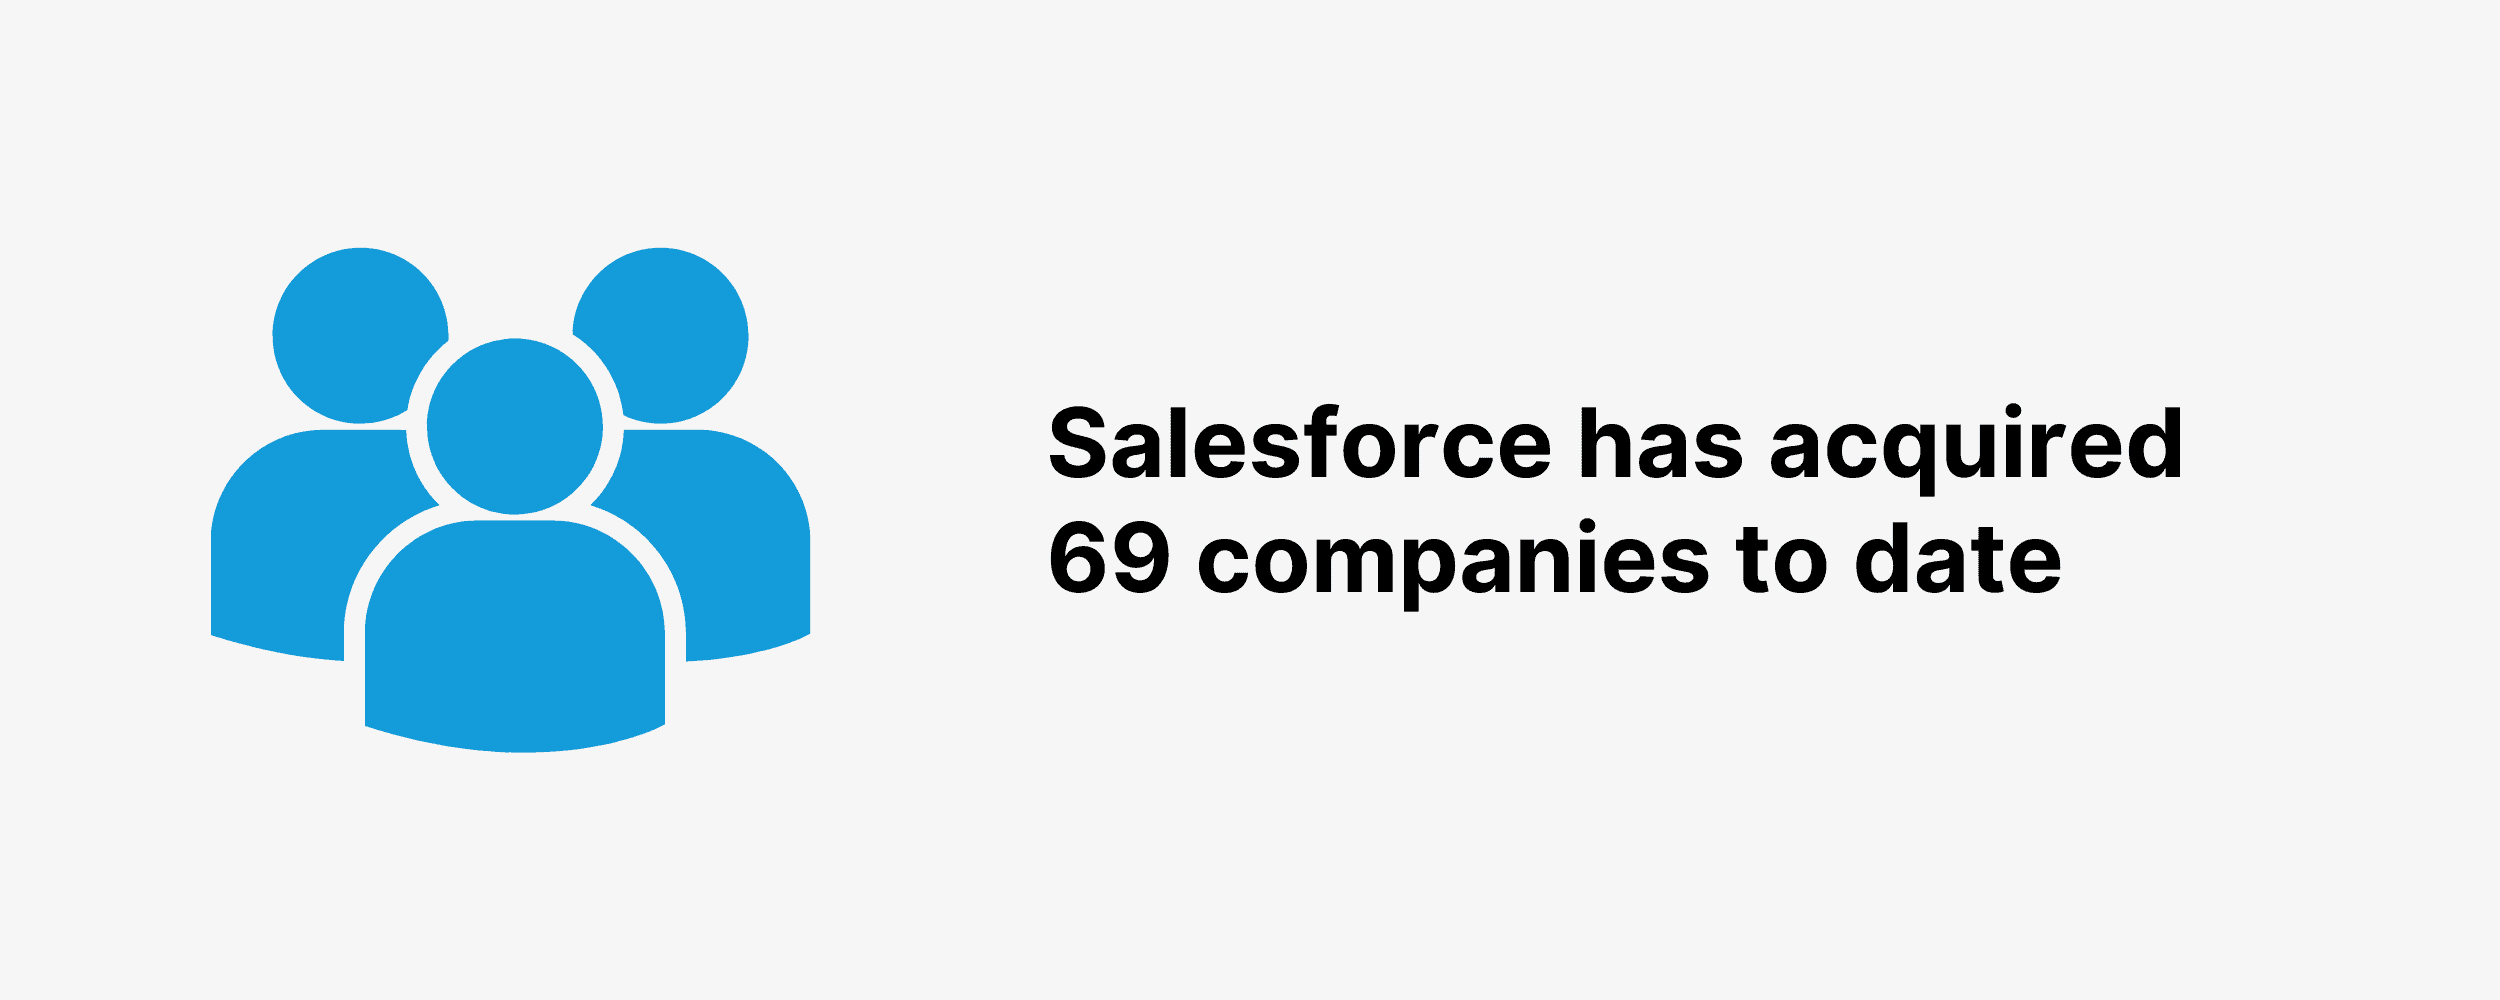 Salesforce has acquired 69 companies to date